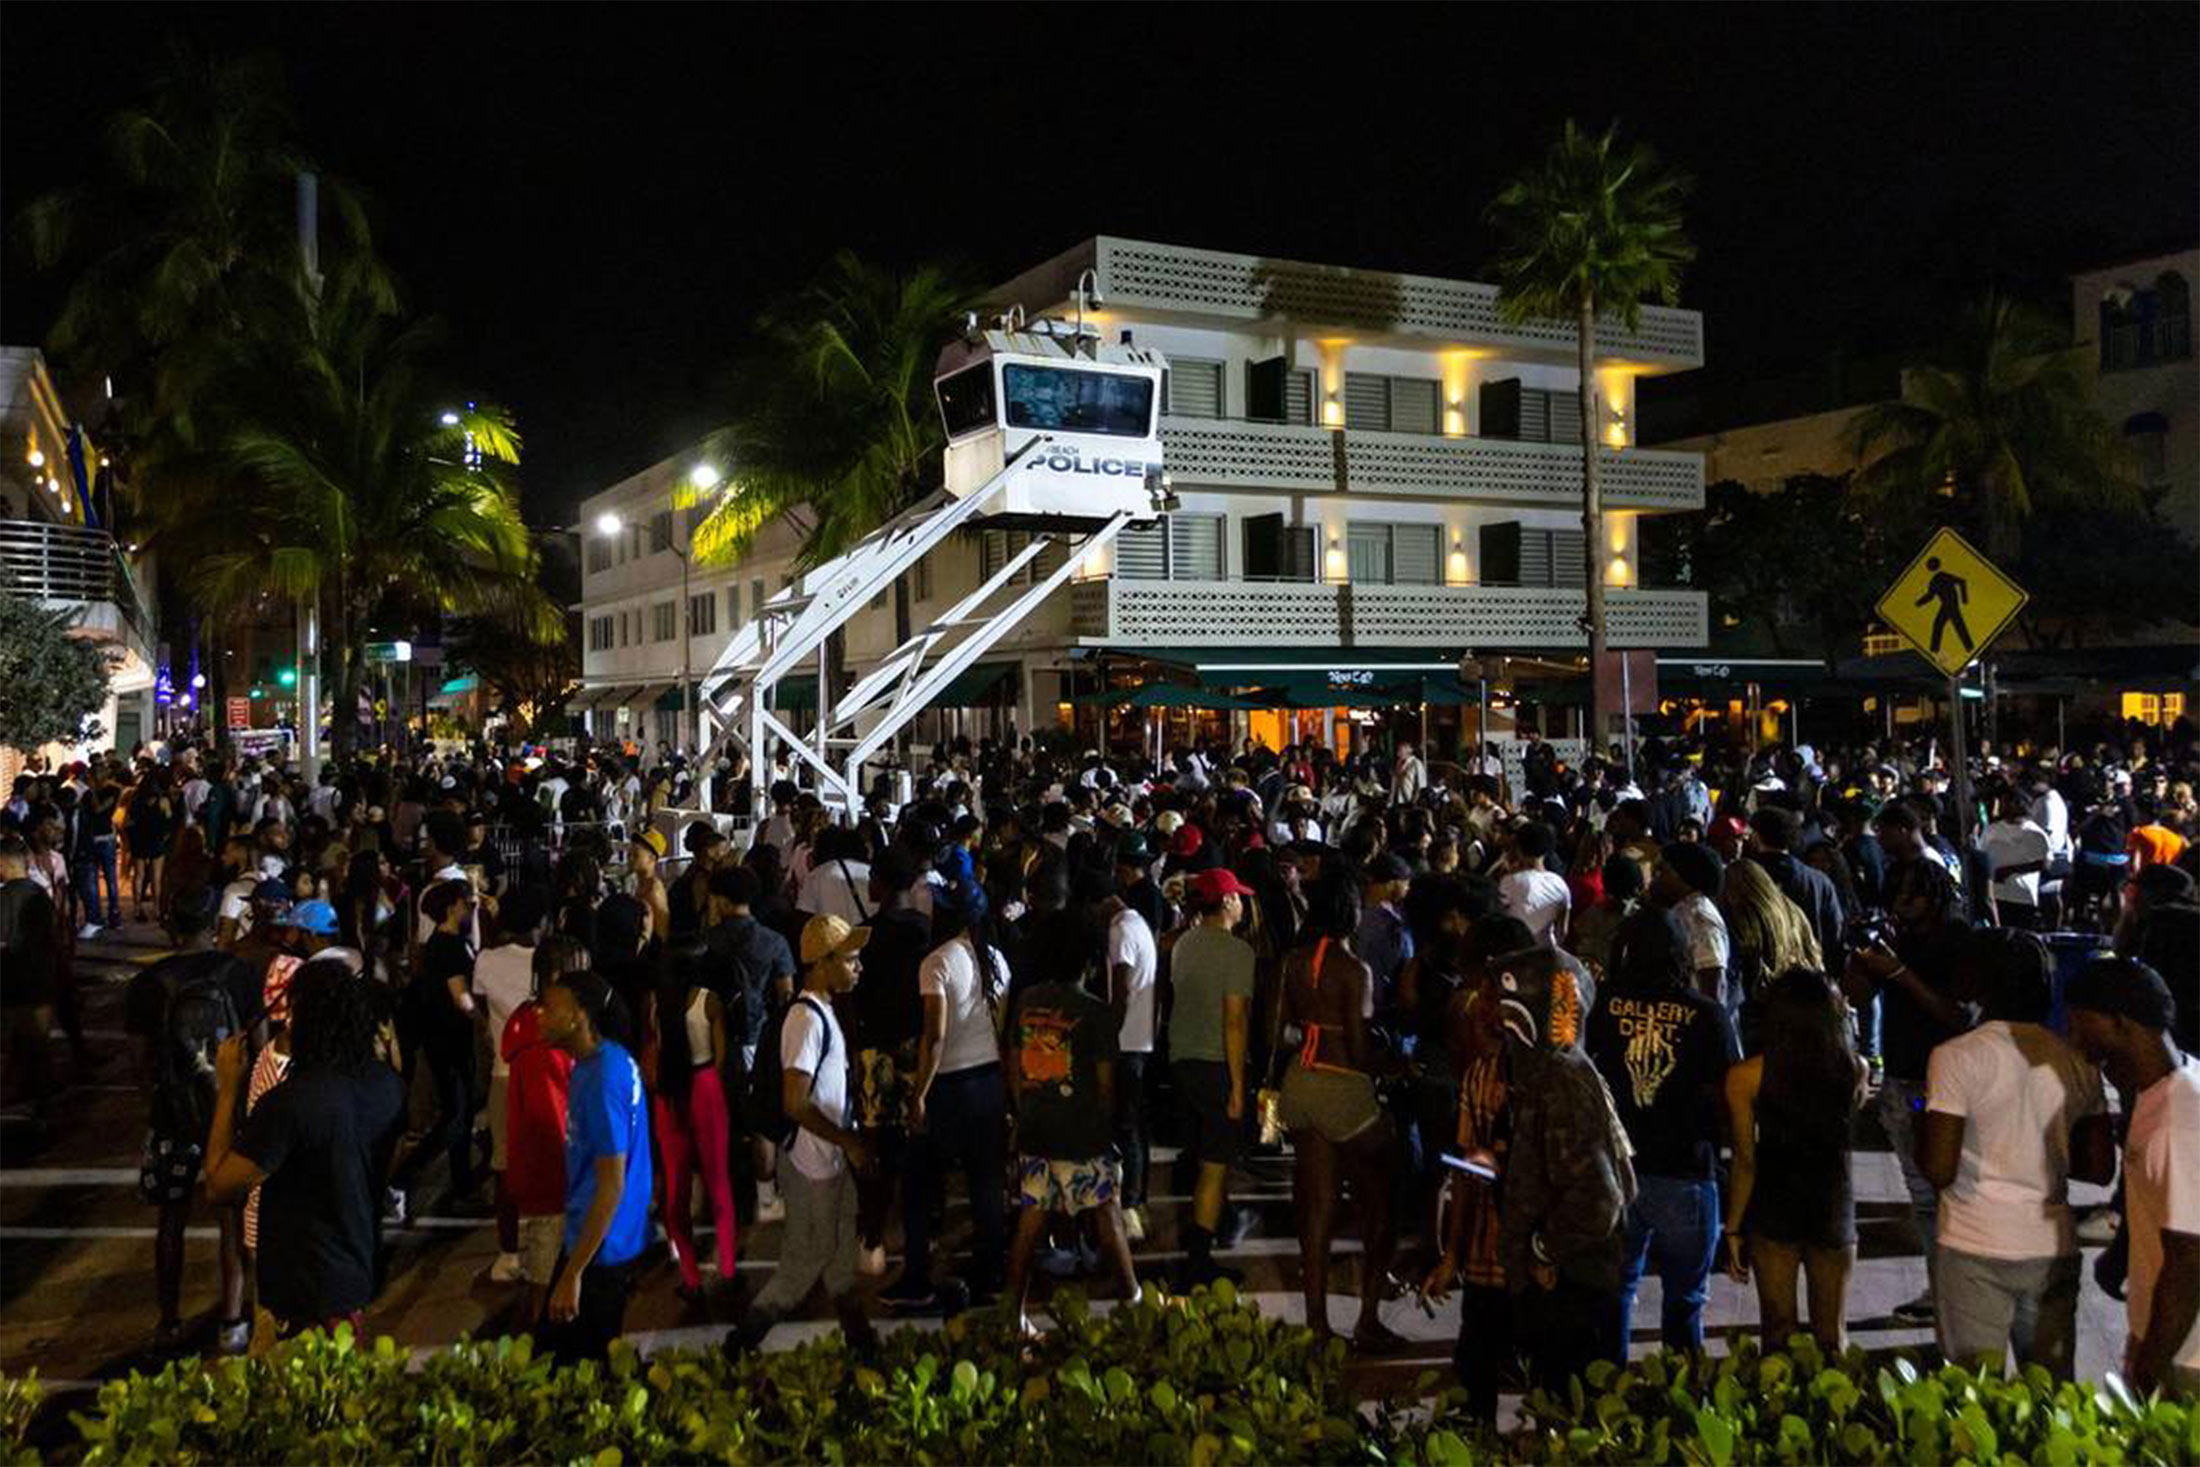 Crowds gather during spring break in Miami Beach, on Saturday, March 18.